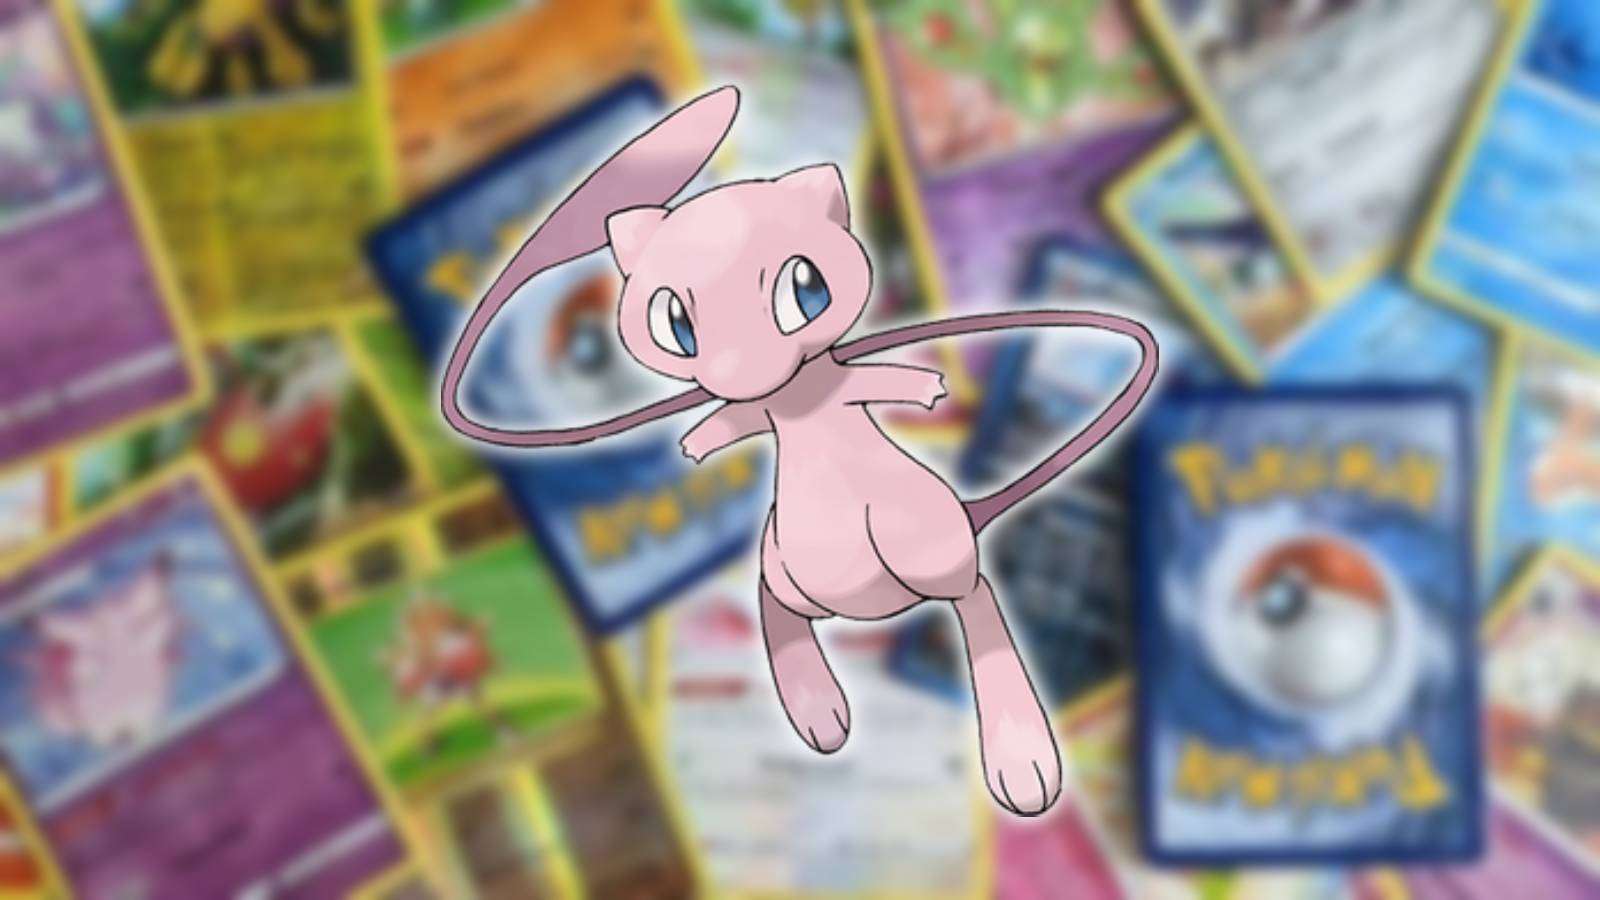 Key art shows the legendary Pokemon Mew, while the background is a blurred image of Pokemon cards